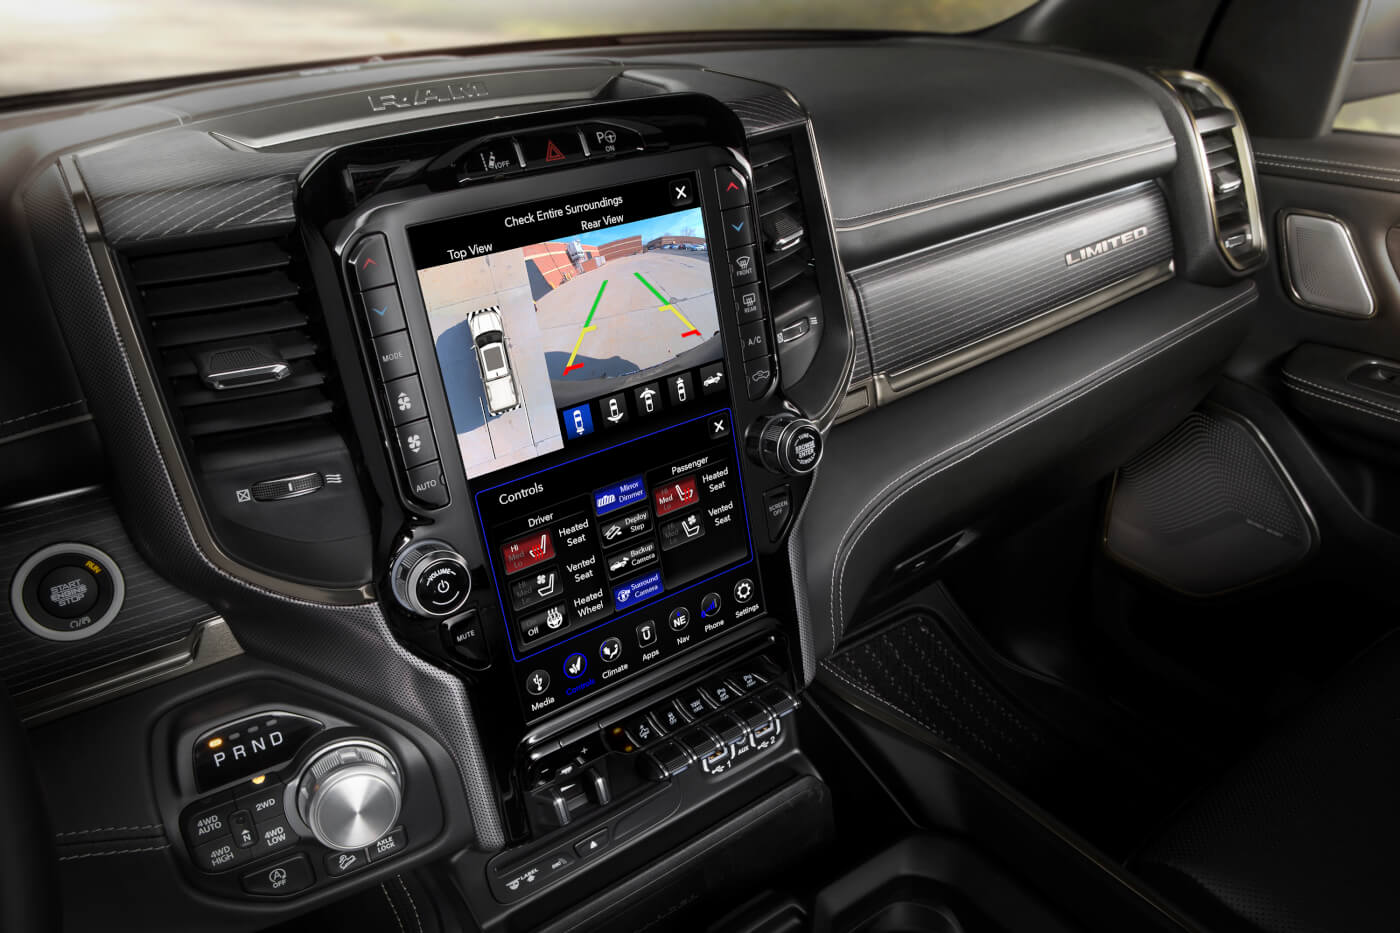 2019 Ram 1500 – Uconnect 4C with 12-inch Screen